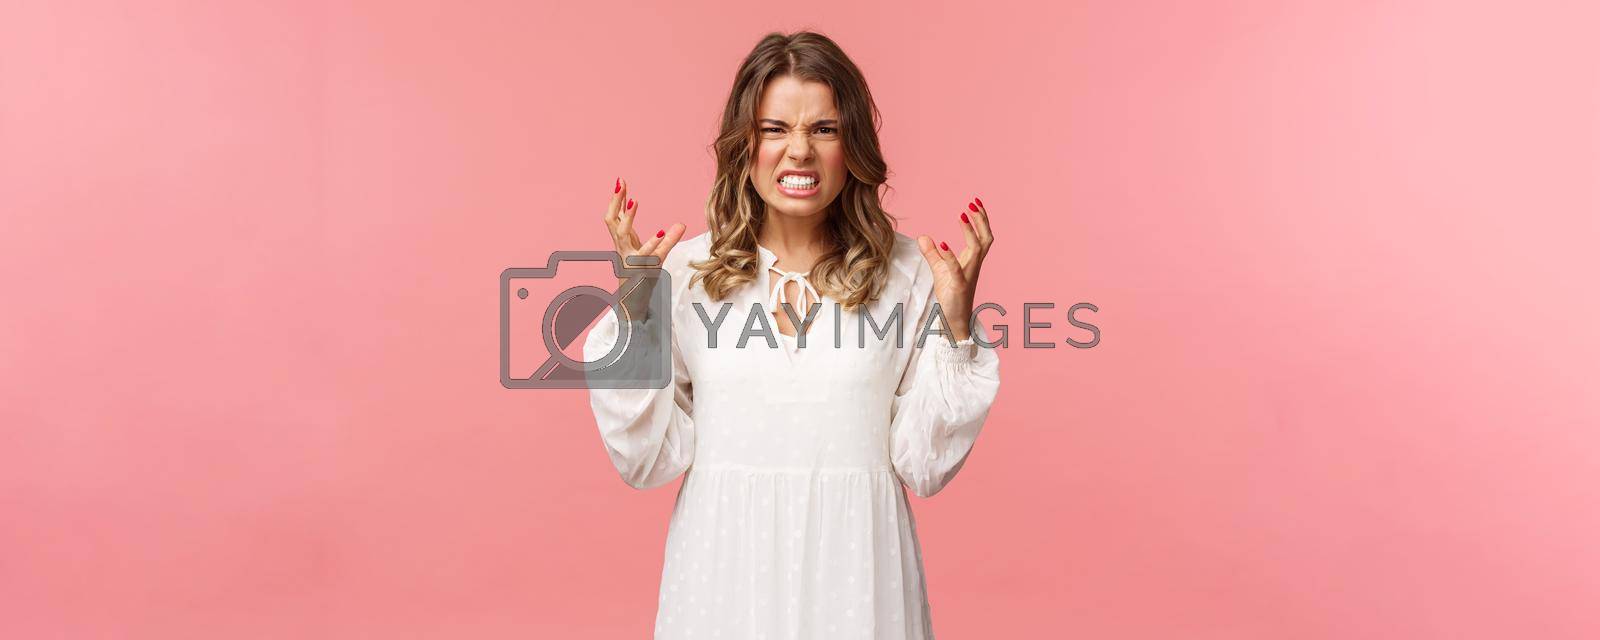 Royalty free image of Portrait of woman losing control over emotions, feel pressured and tensed, lose temper, clench hands into fists and stare aggressive with angry, outraged expression, hate someone badly by Benzoix